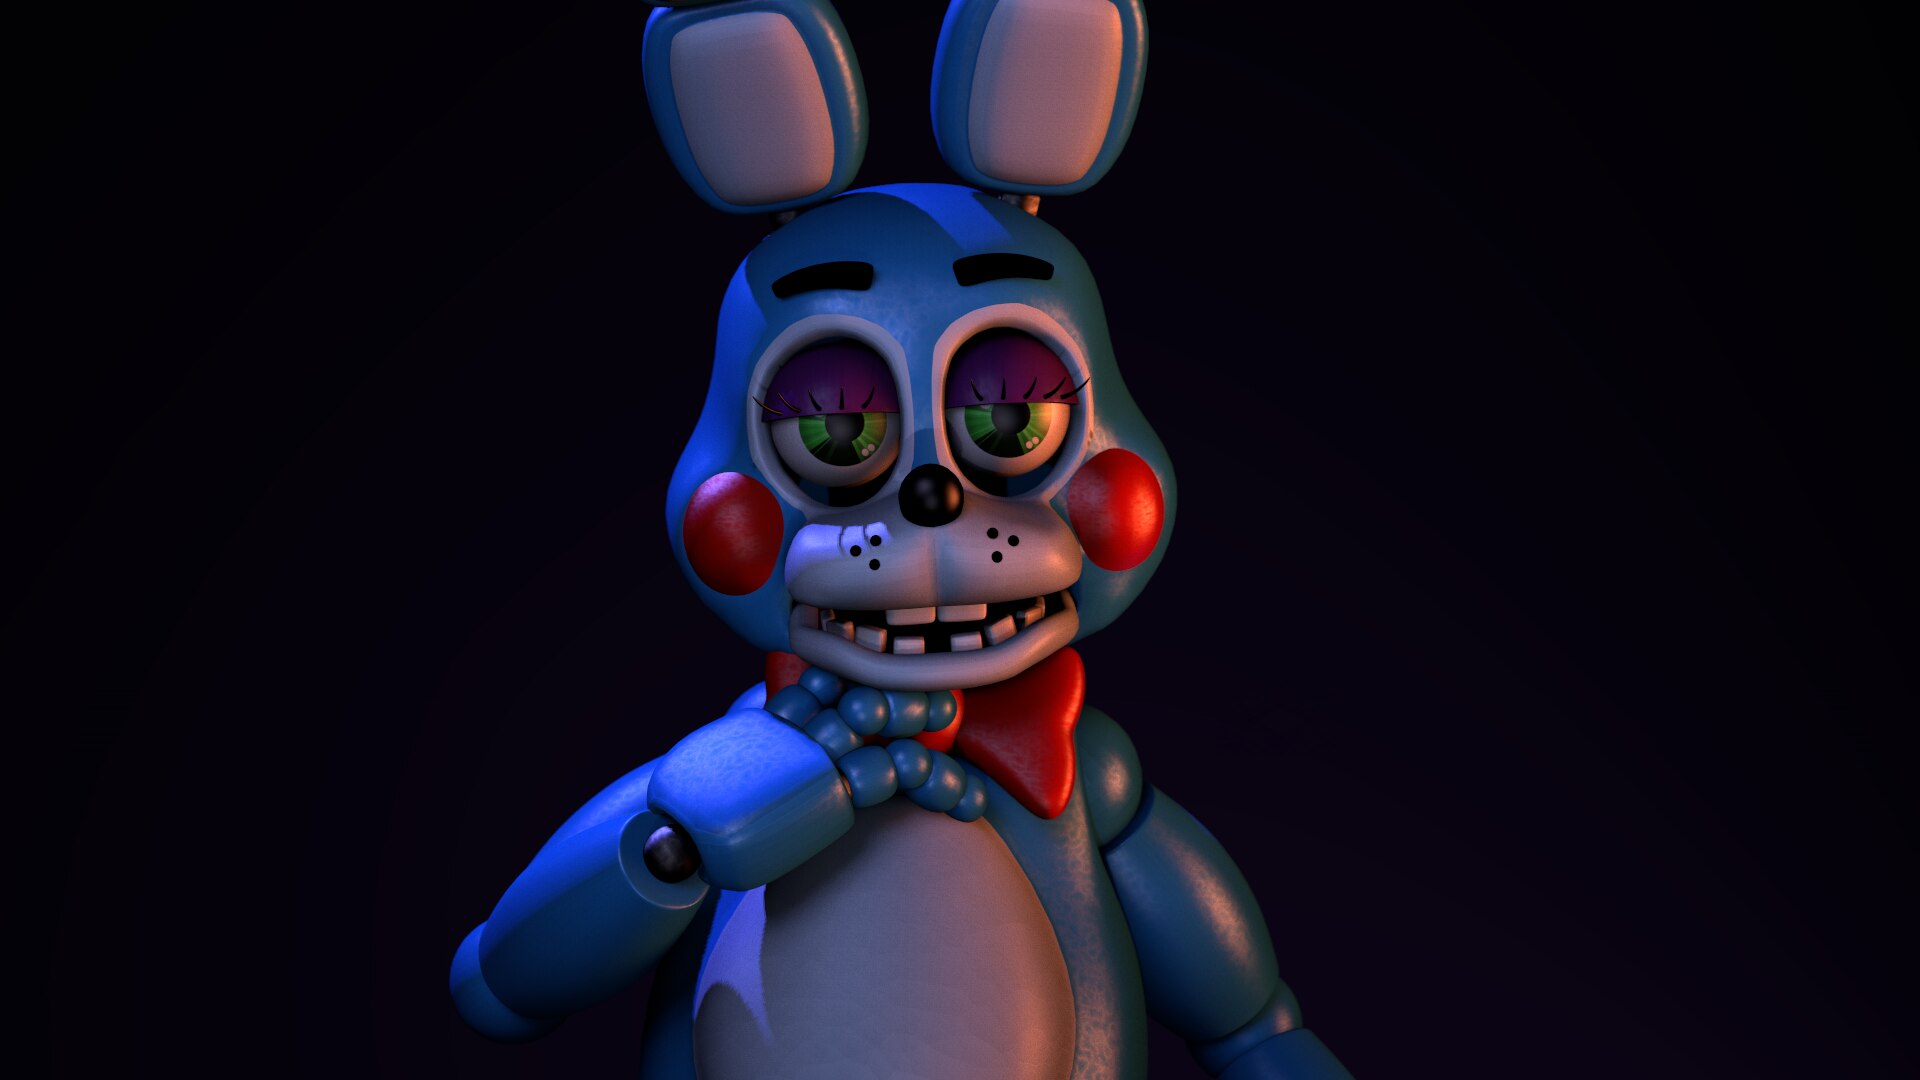 Every Toy Bonnie Has In Toy Story